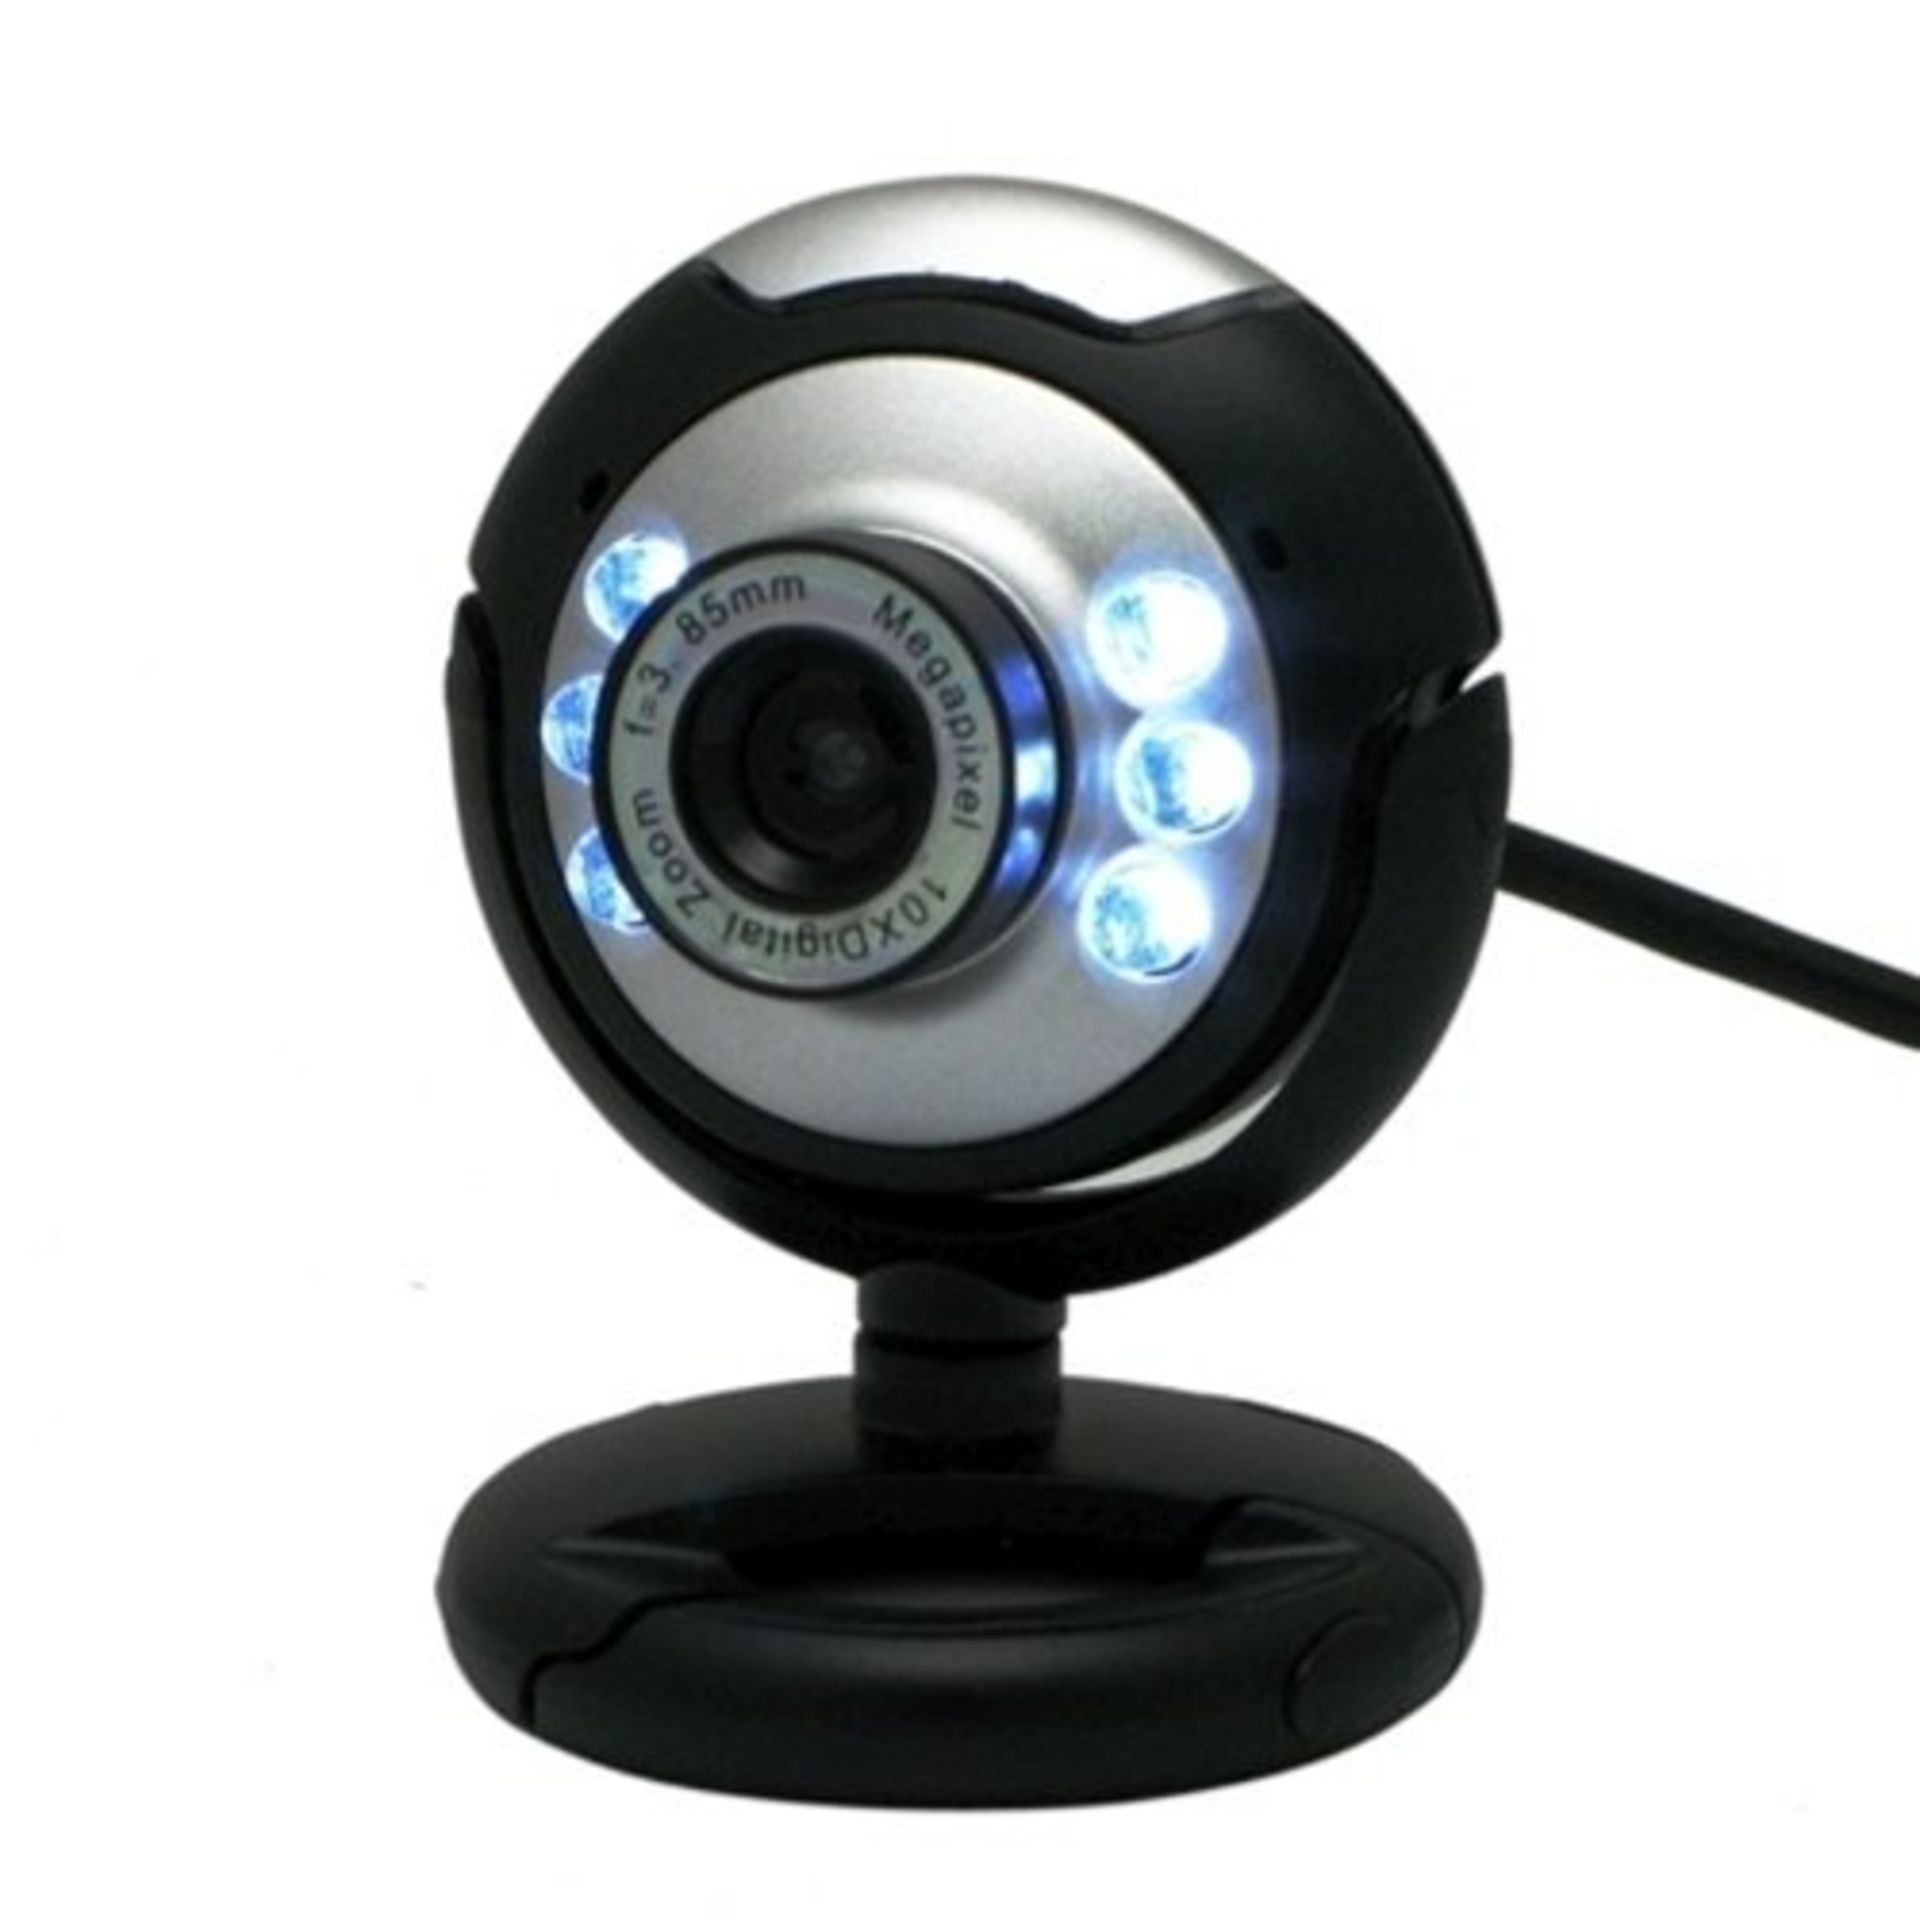 Brand New USB Mini PC Webcam With Built In Microphone - 10x Zoom - 6 Bright LED Lights For Use At - Image 2 of 2